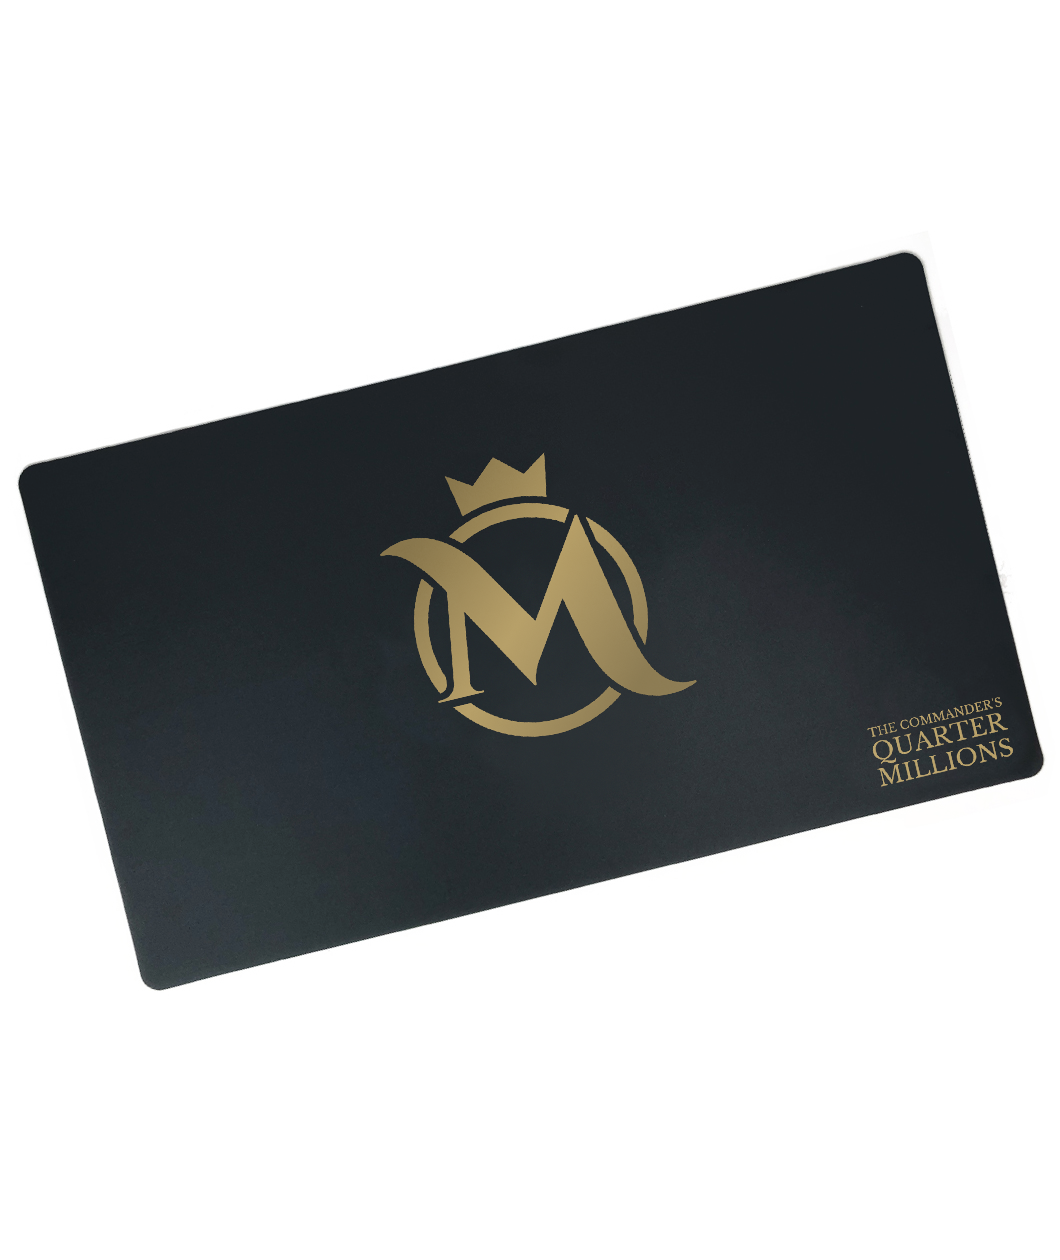 A black rectangular playmat with curved edges. In the center, a gold stylized M is in front of a gold circle. A gold crown is above. “The Commander’s Quarter Millions” is in the bottom right in gold serif font - from the Commander’s Quarters